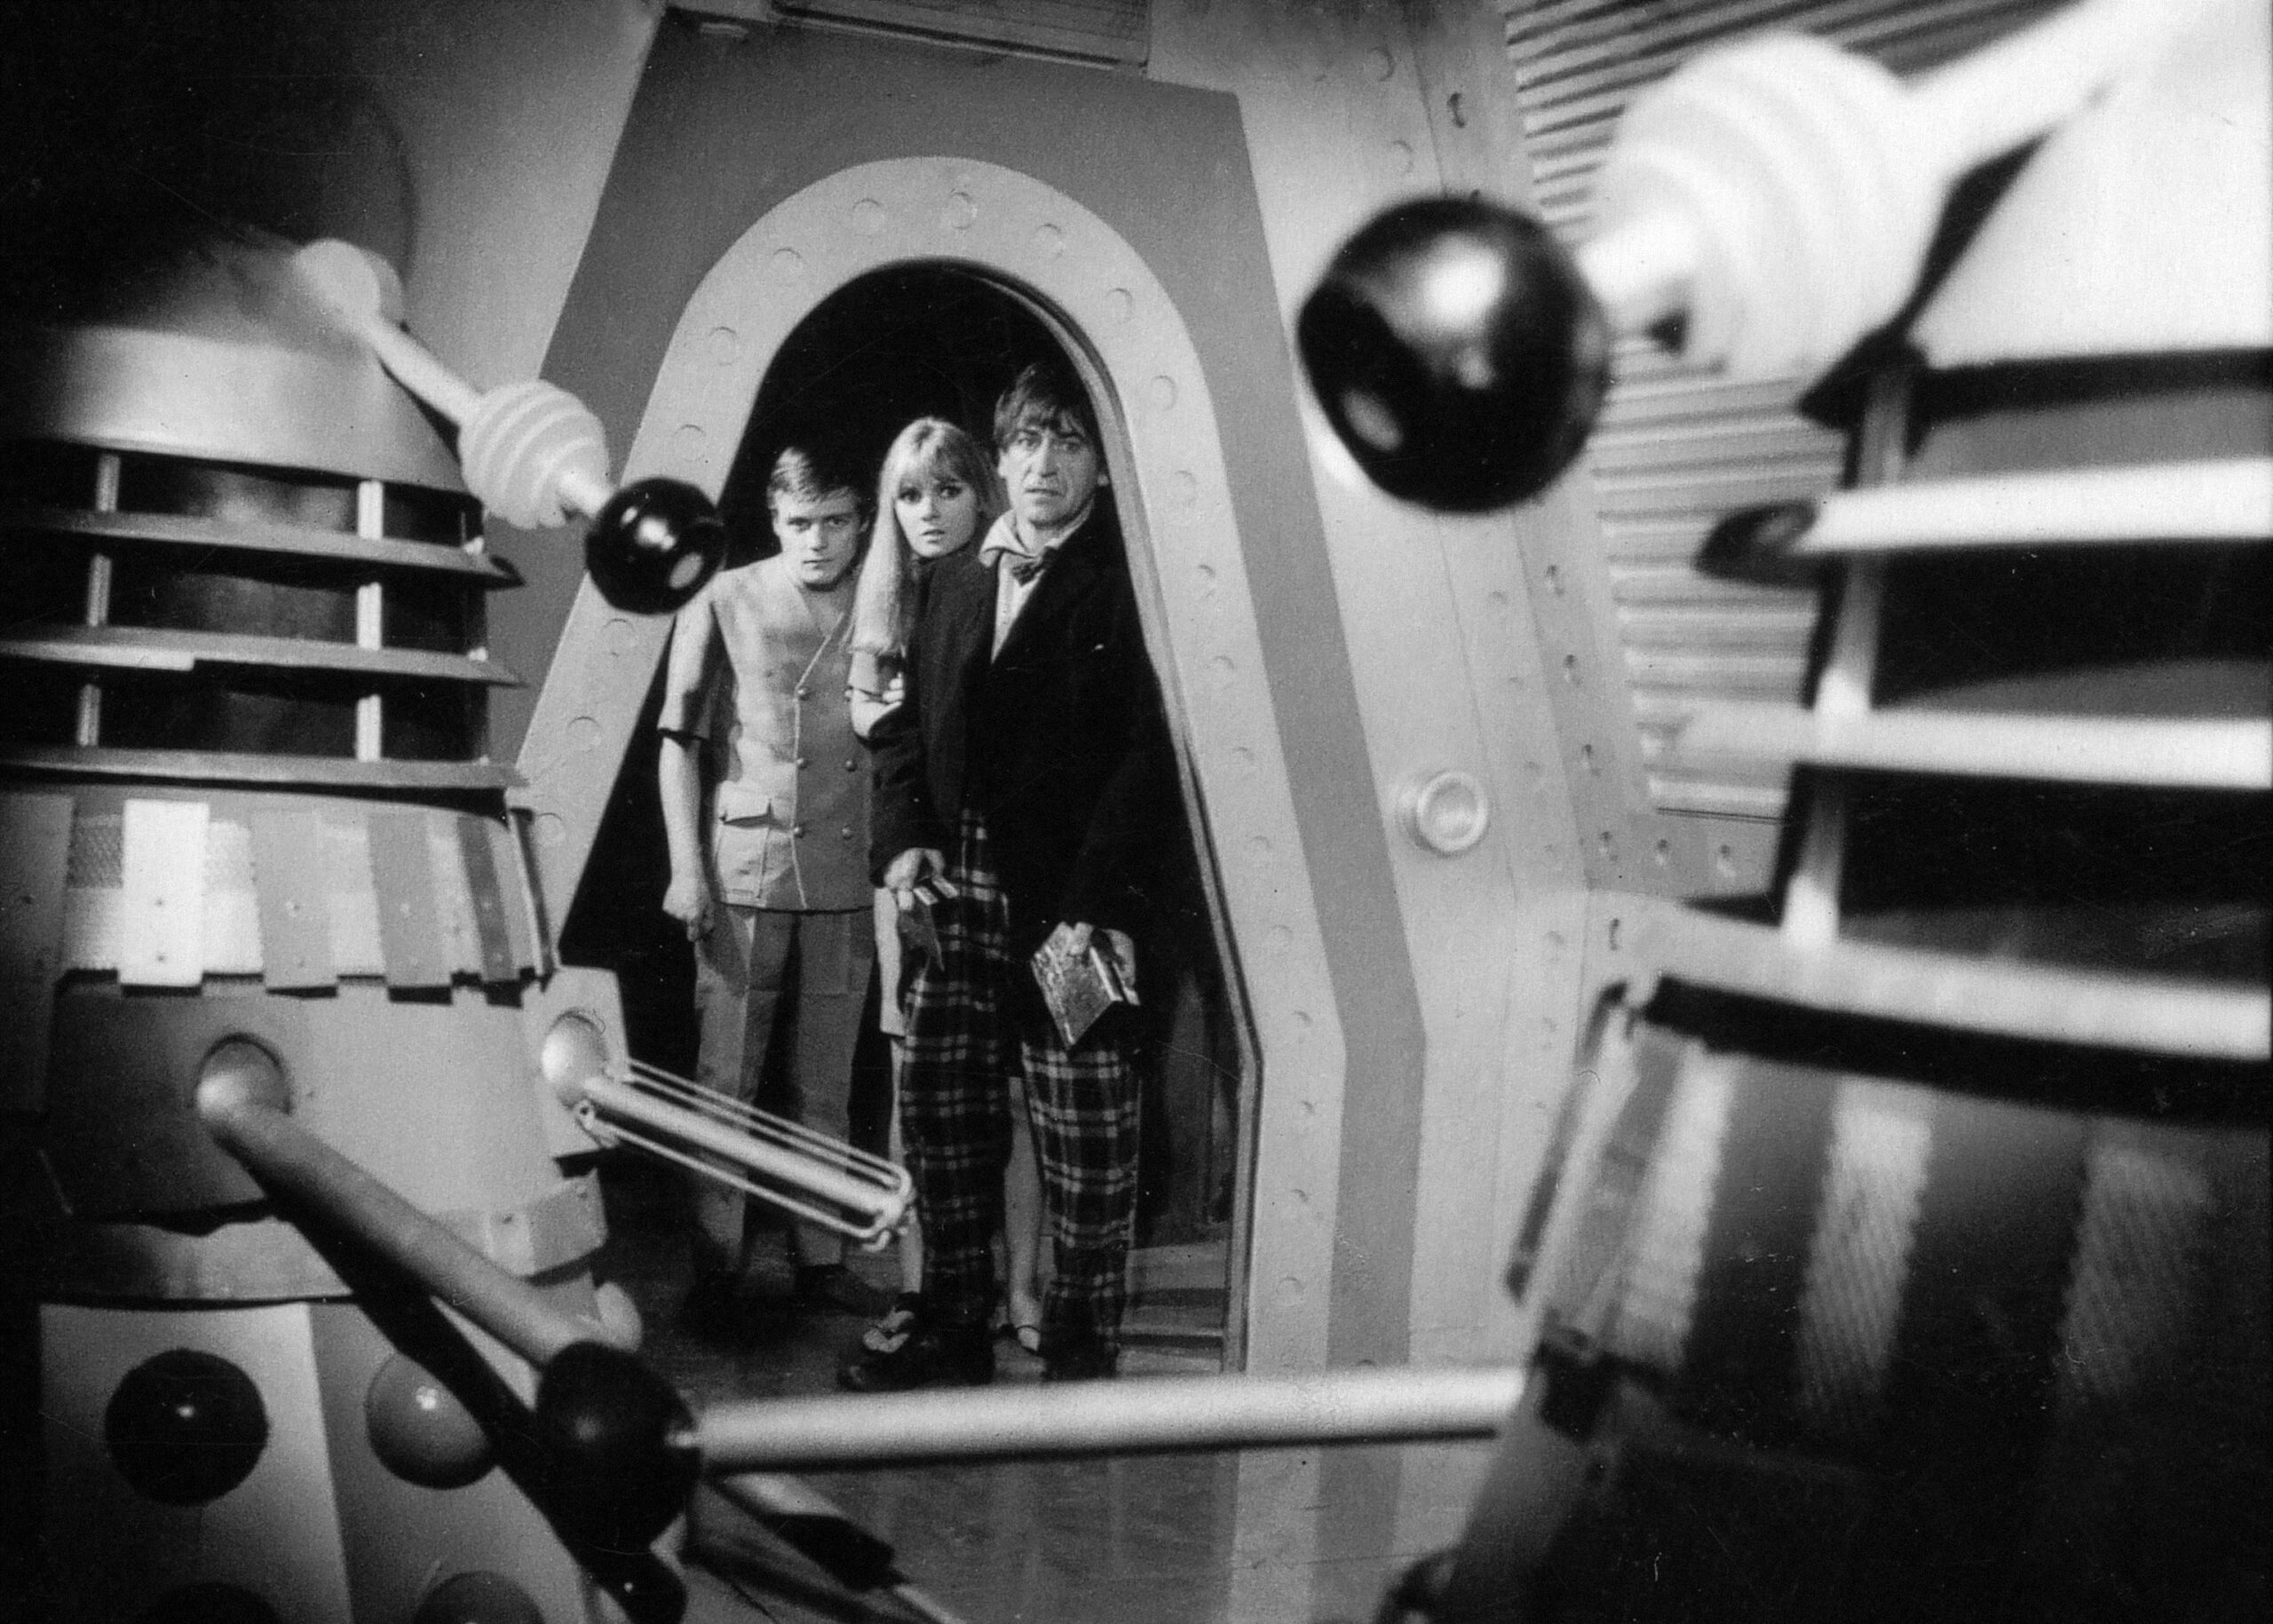 The Power of the Daleks – Templates For the Future